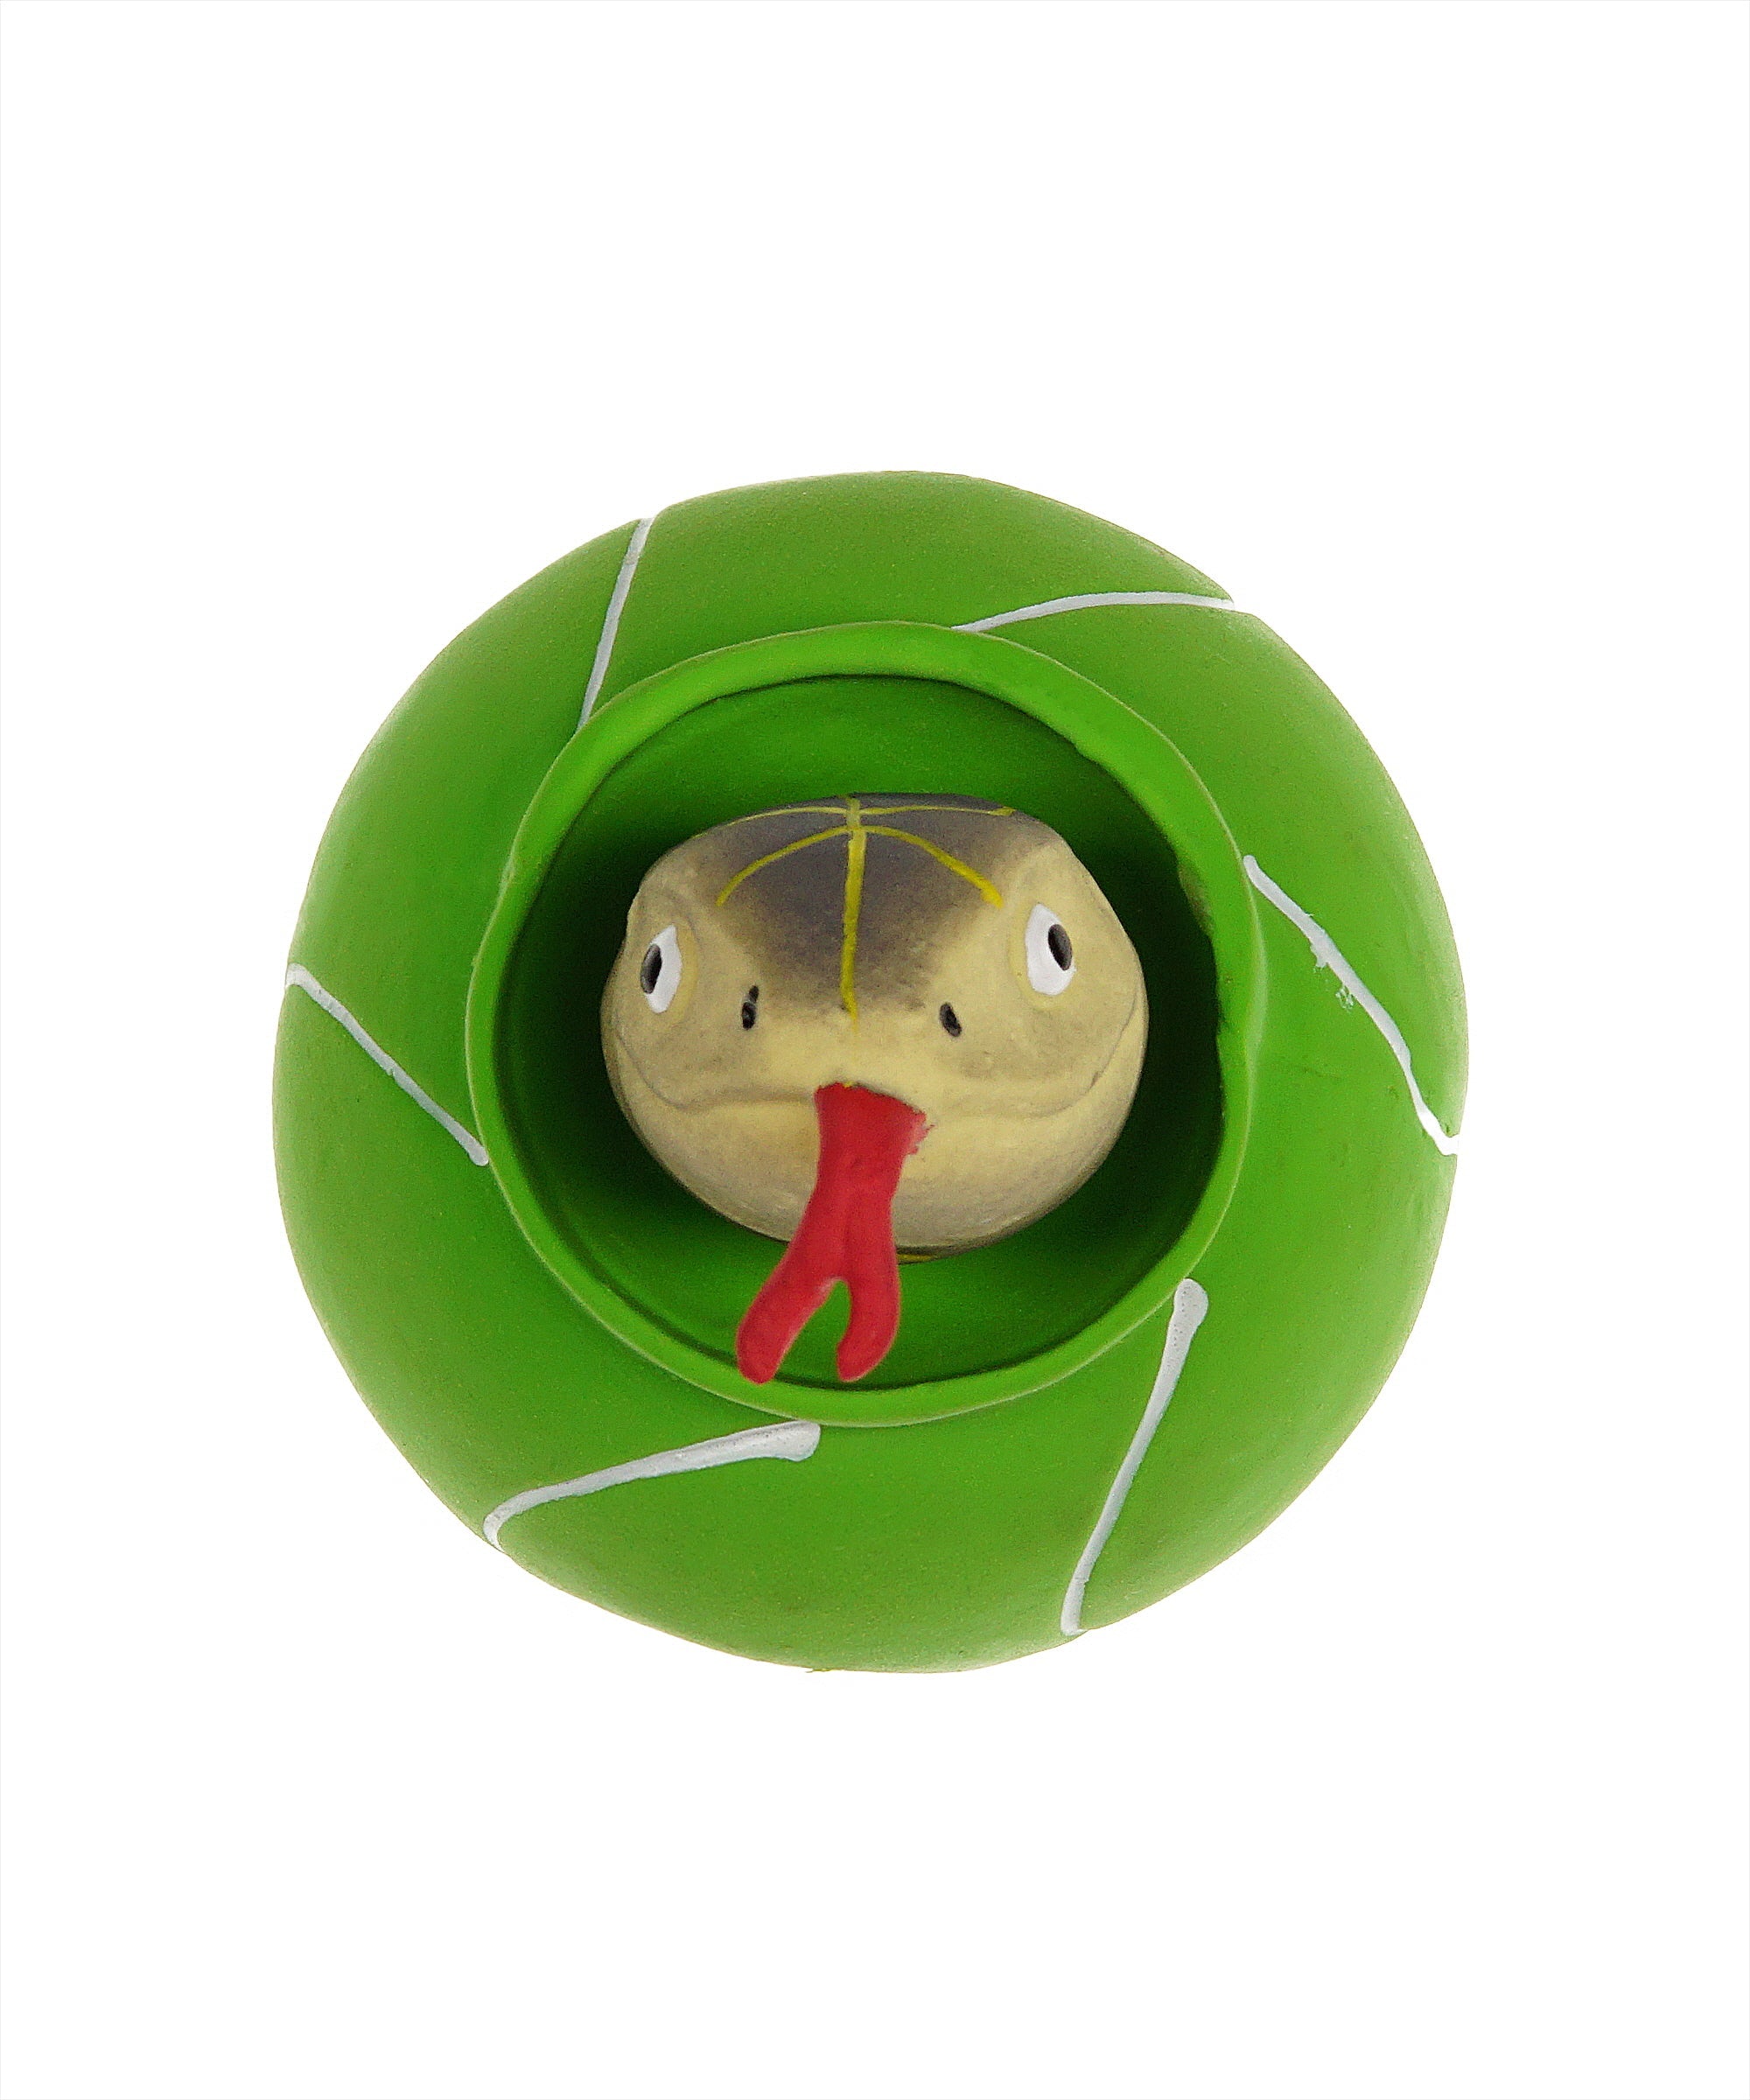 rubber tennis ball with pop up snake dog toy 3"